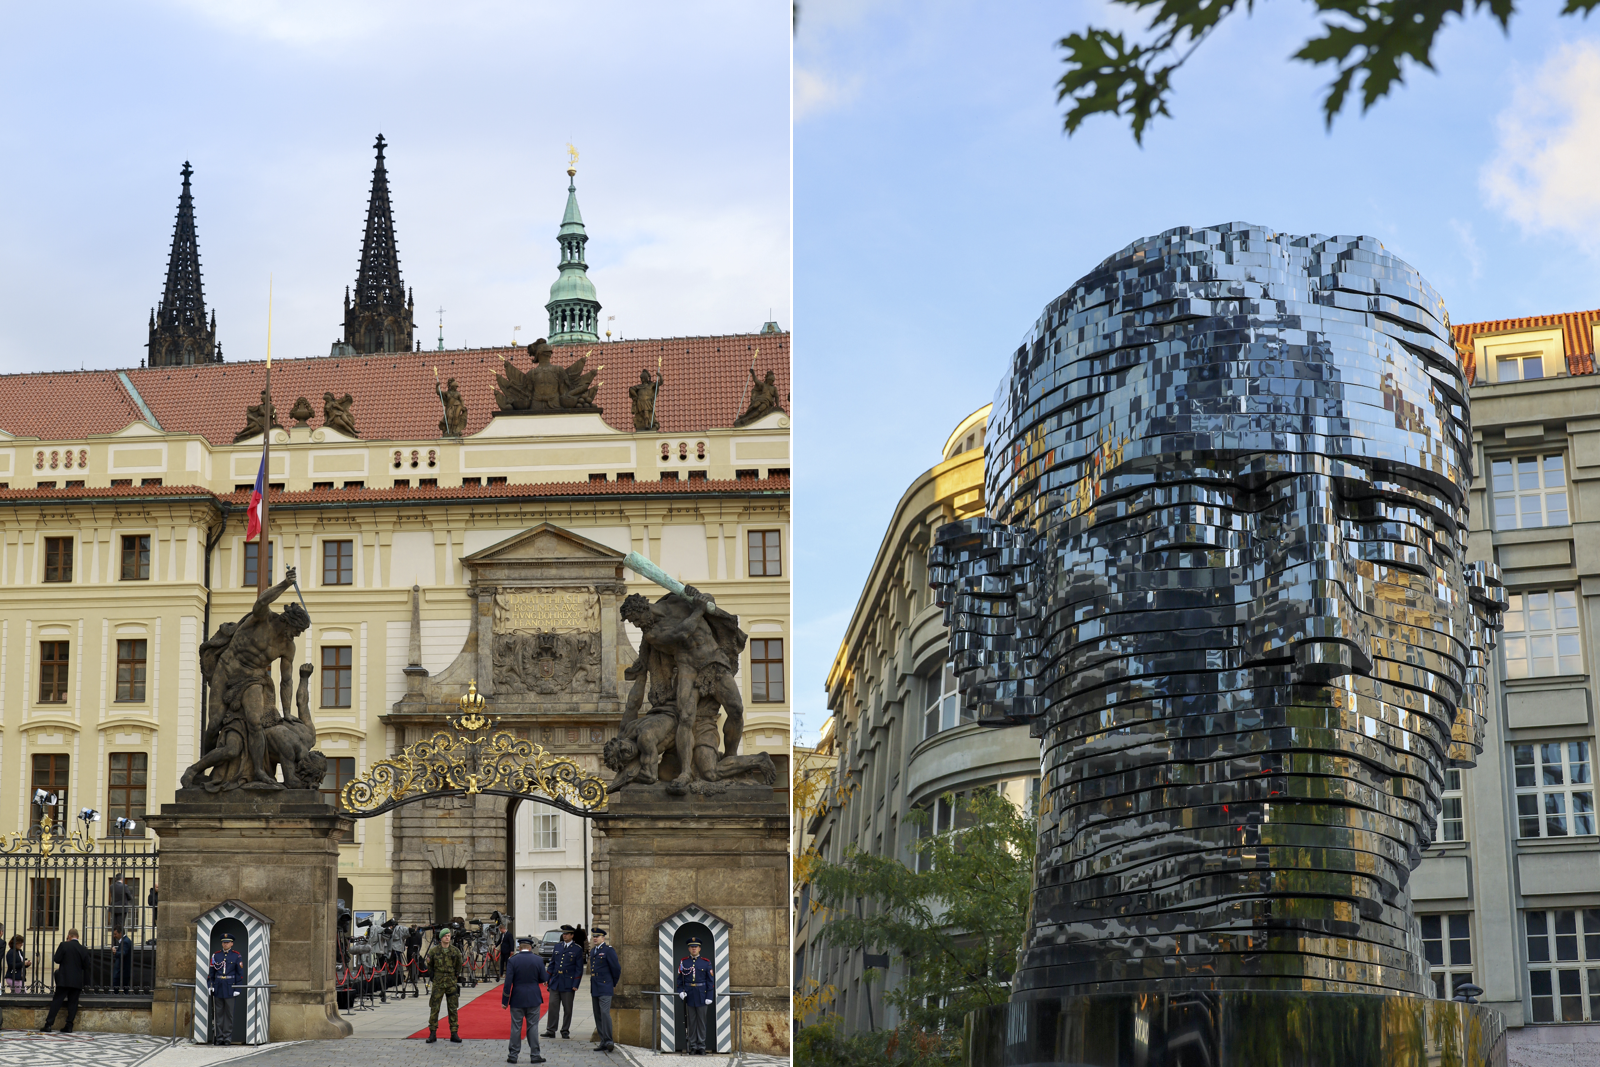 A state of Franz Kafka, who was born in Prague, and Prague Castle